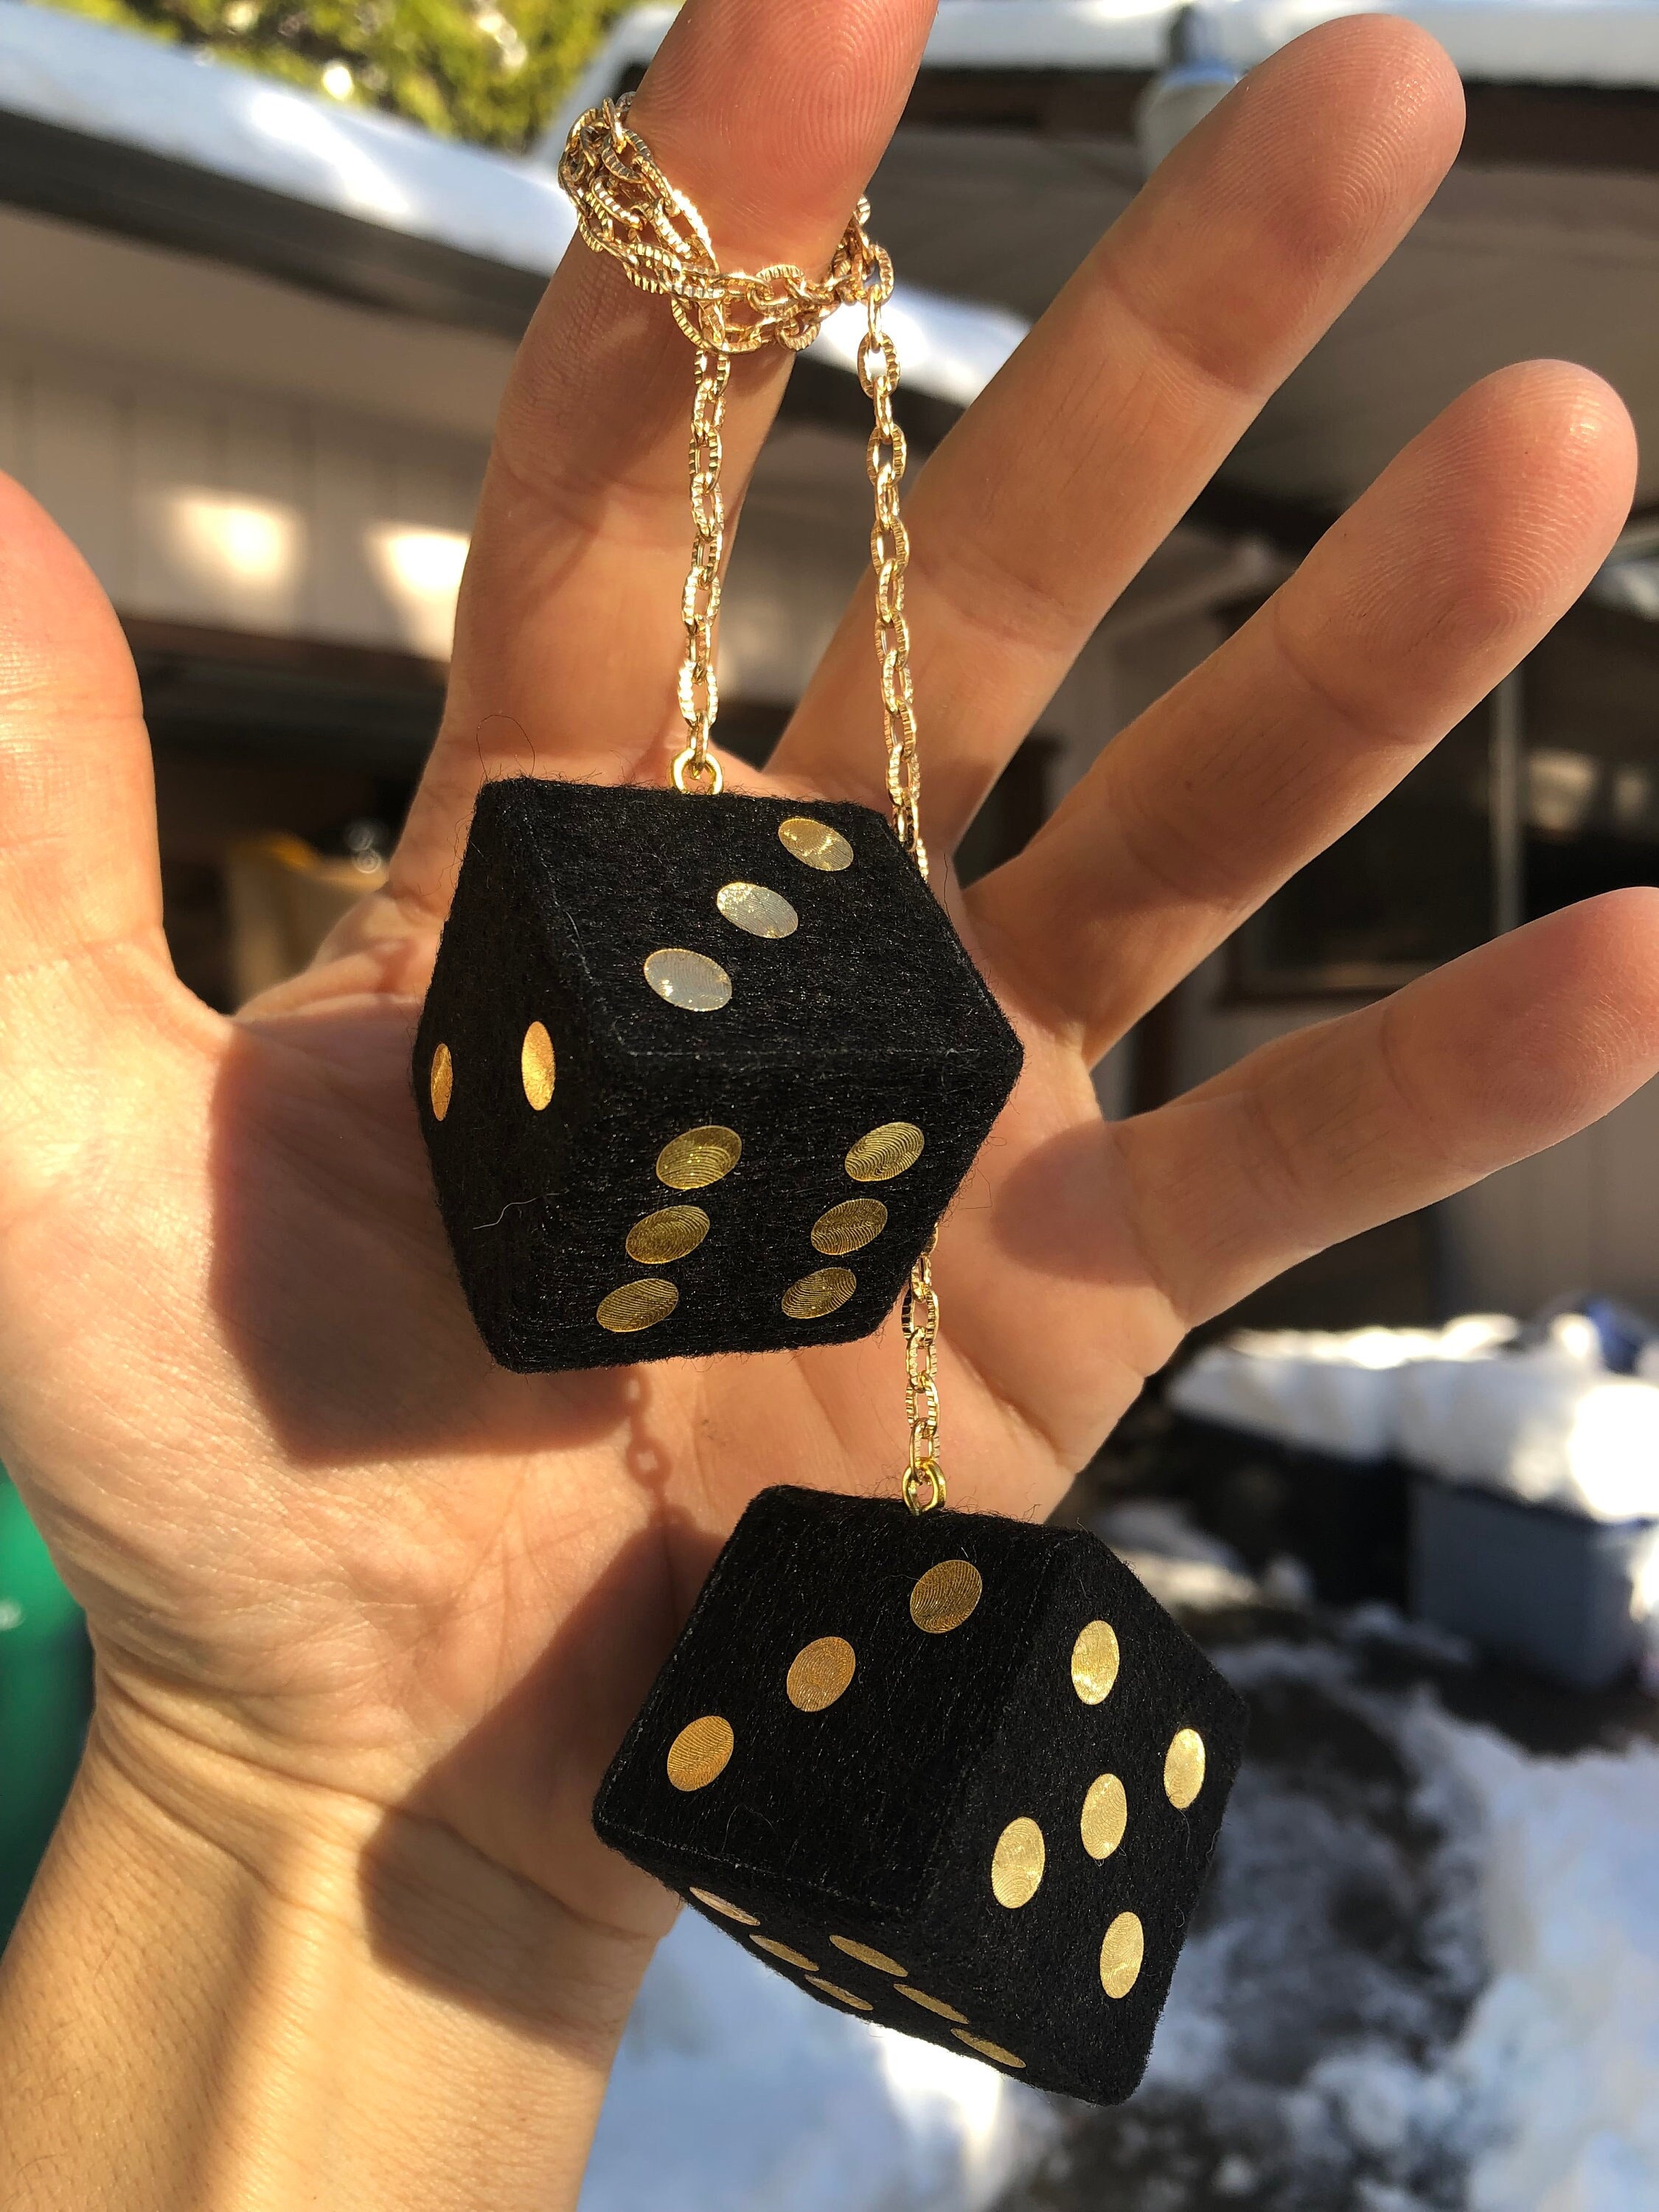 Black Fuzzy Dice With Metallic Gold Dots and Chain or Cord / Car  Accessories, Charms, Gift, Novelty, Mirror Danglers, Car Dice, Car Charm 